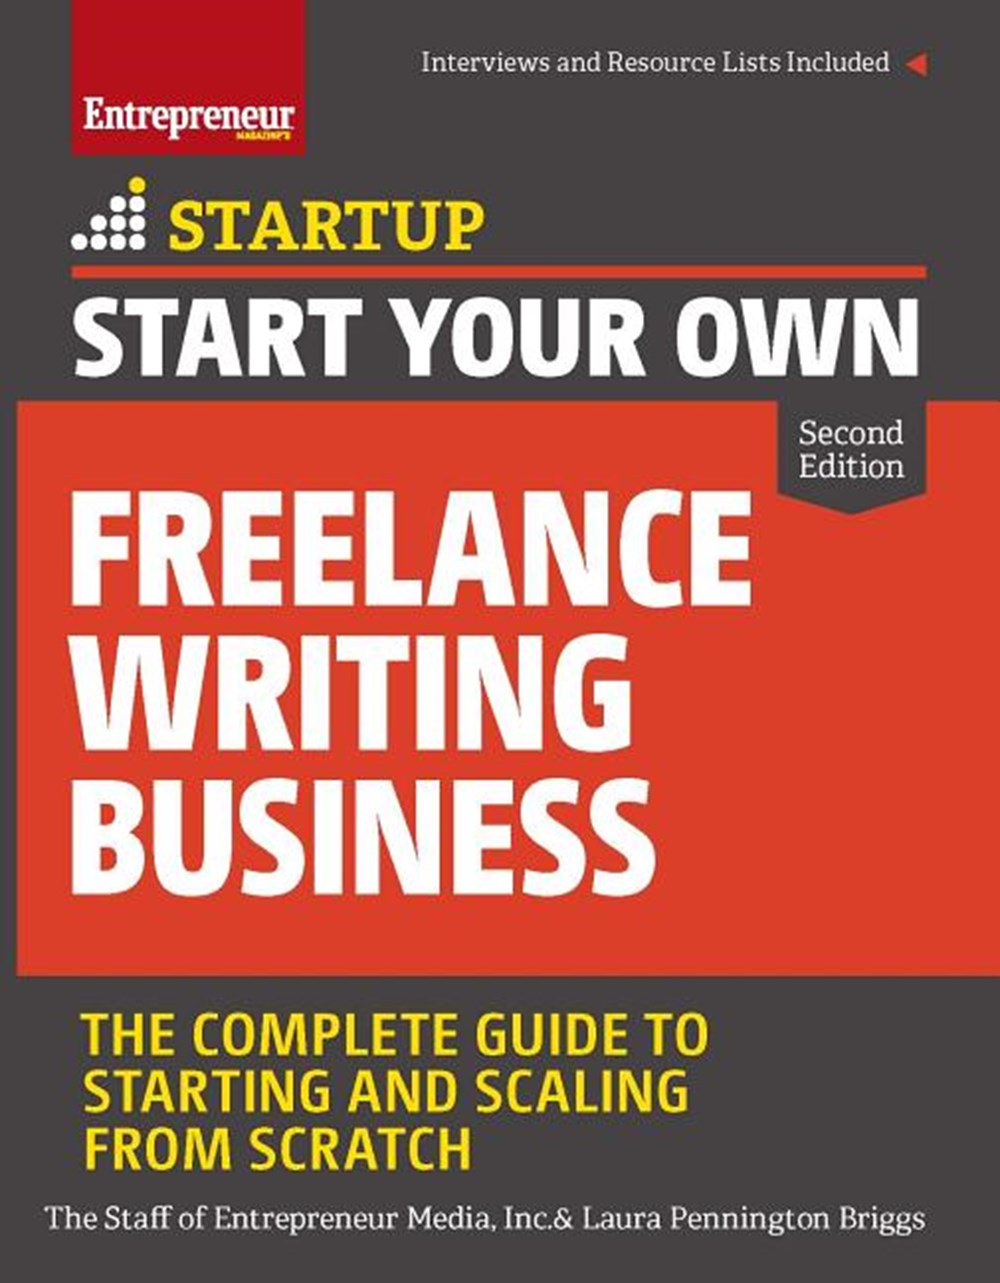 Start Your Own Freelance Writing Business The Complete Guide to Starting and Scaling from Scratch